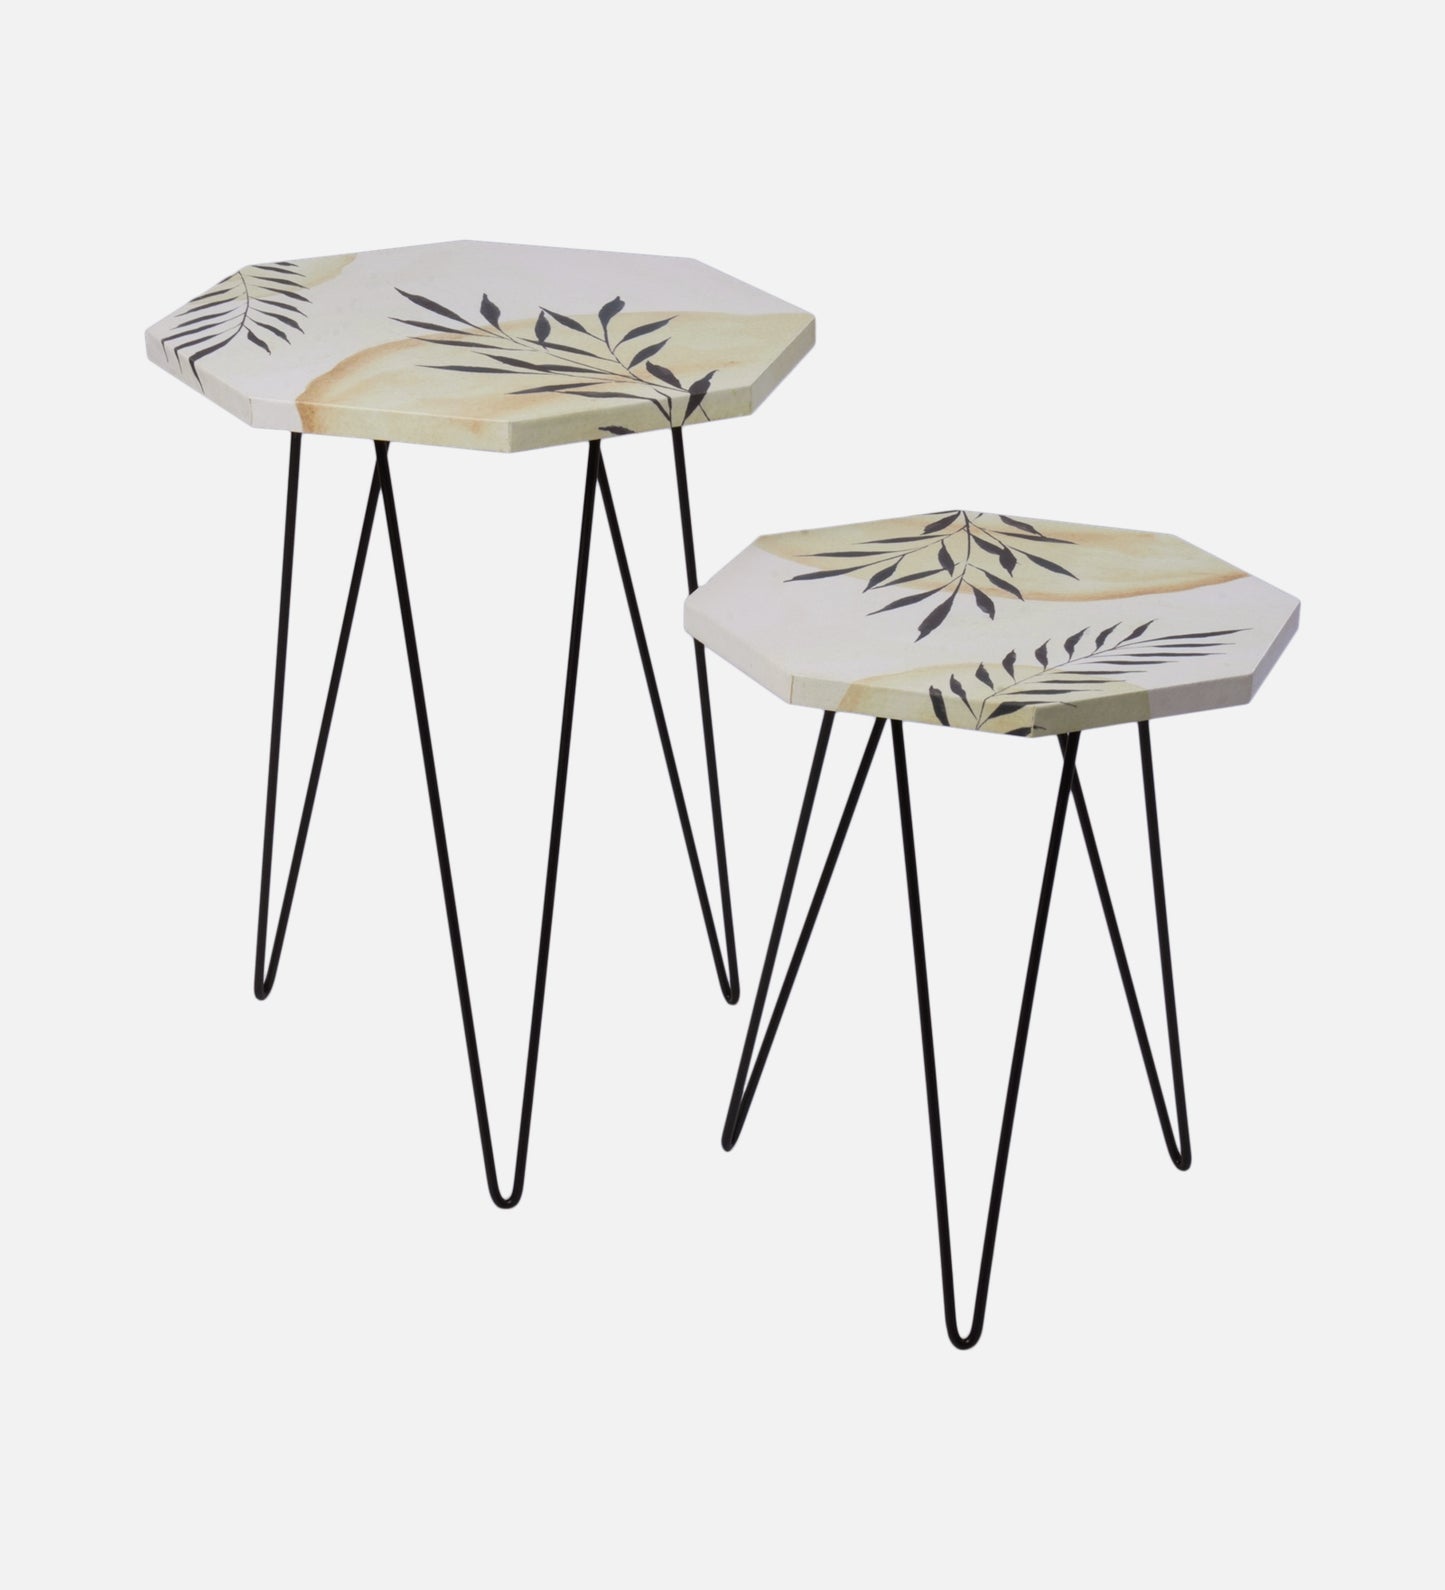 Desert Desire Octagon Nesting Tables with Hairpin Legs, Side Tables, Wooden Tables, Living Room Decor by A Tiny Mistake